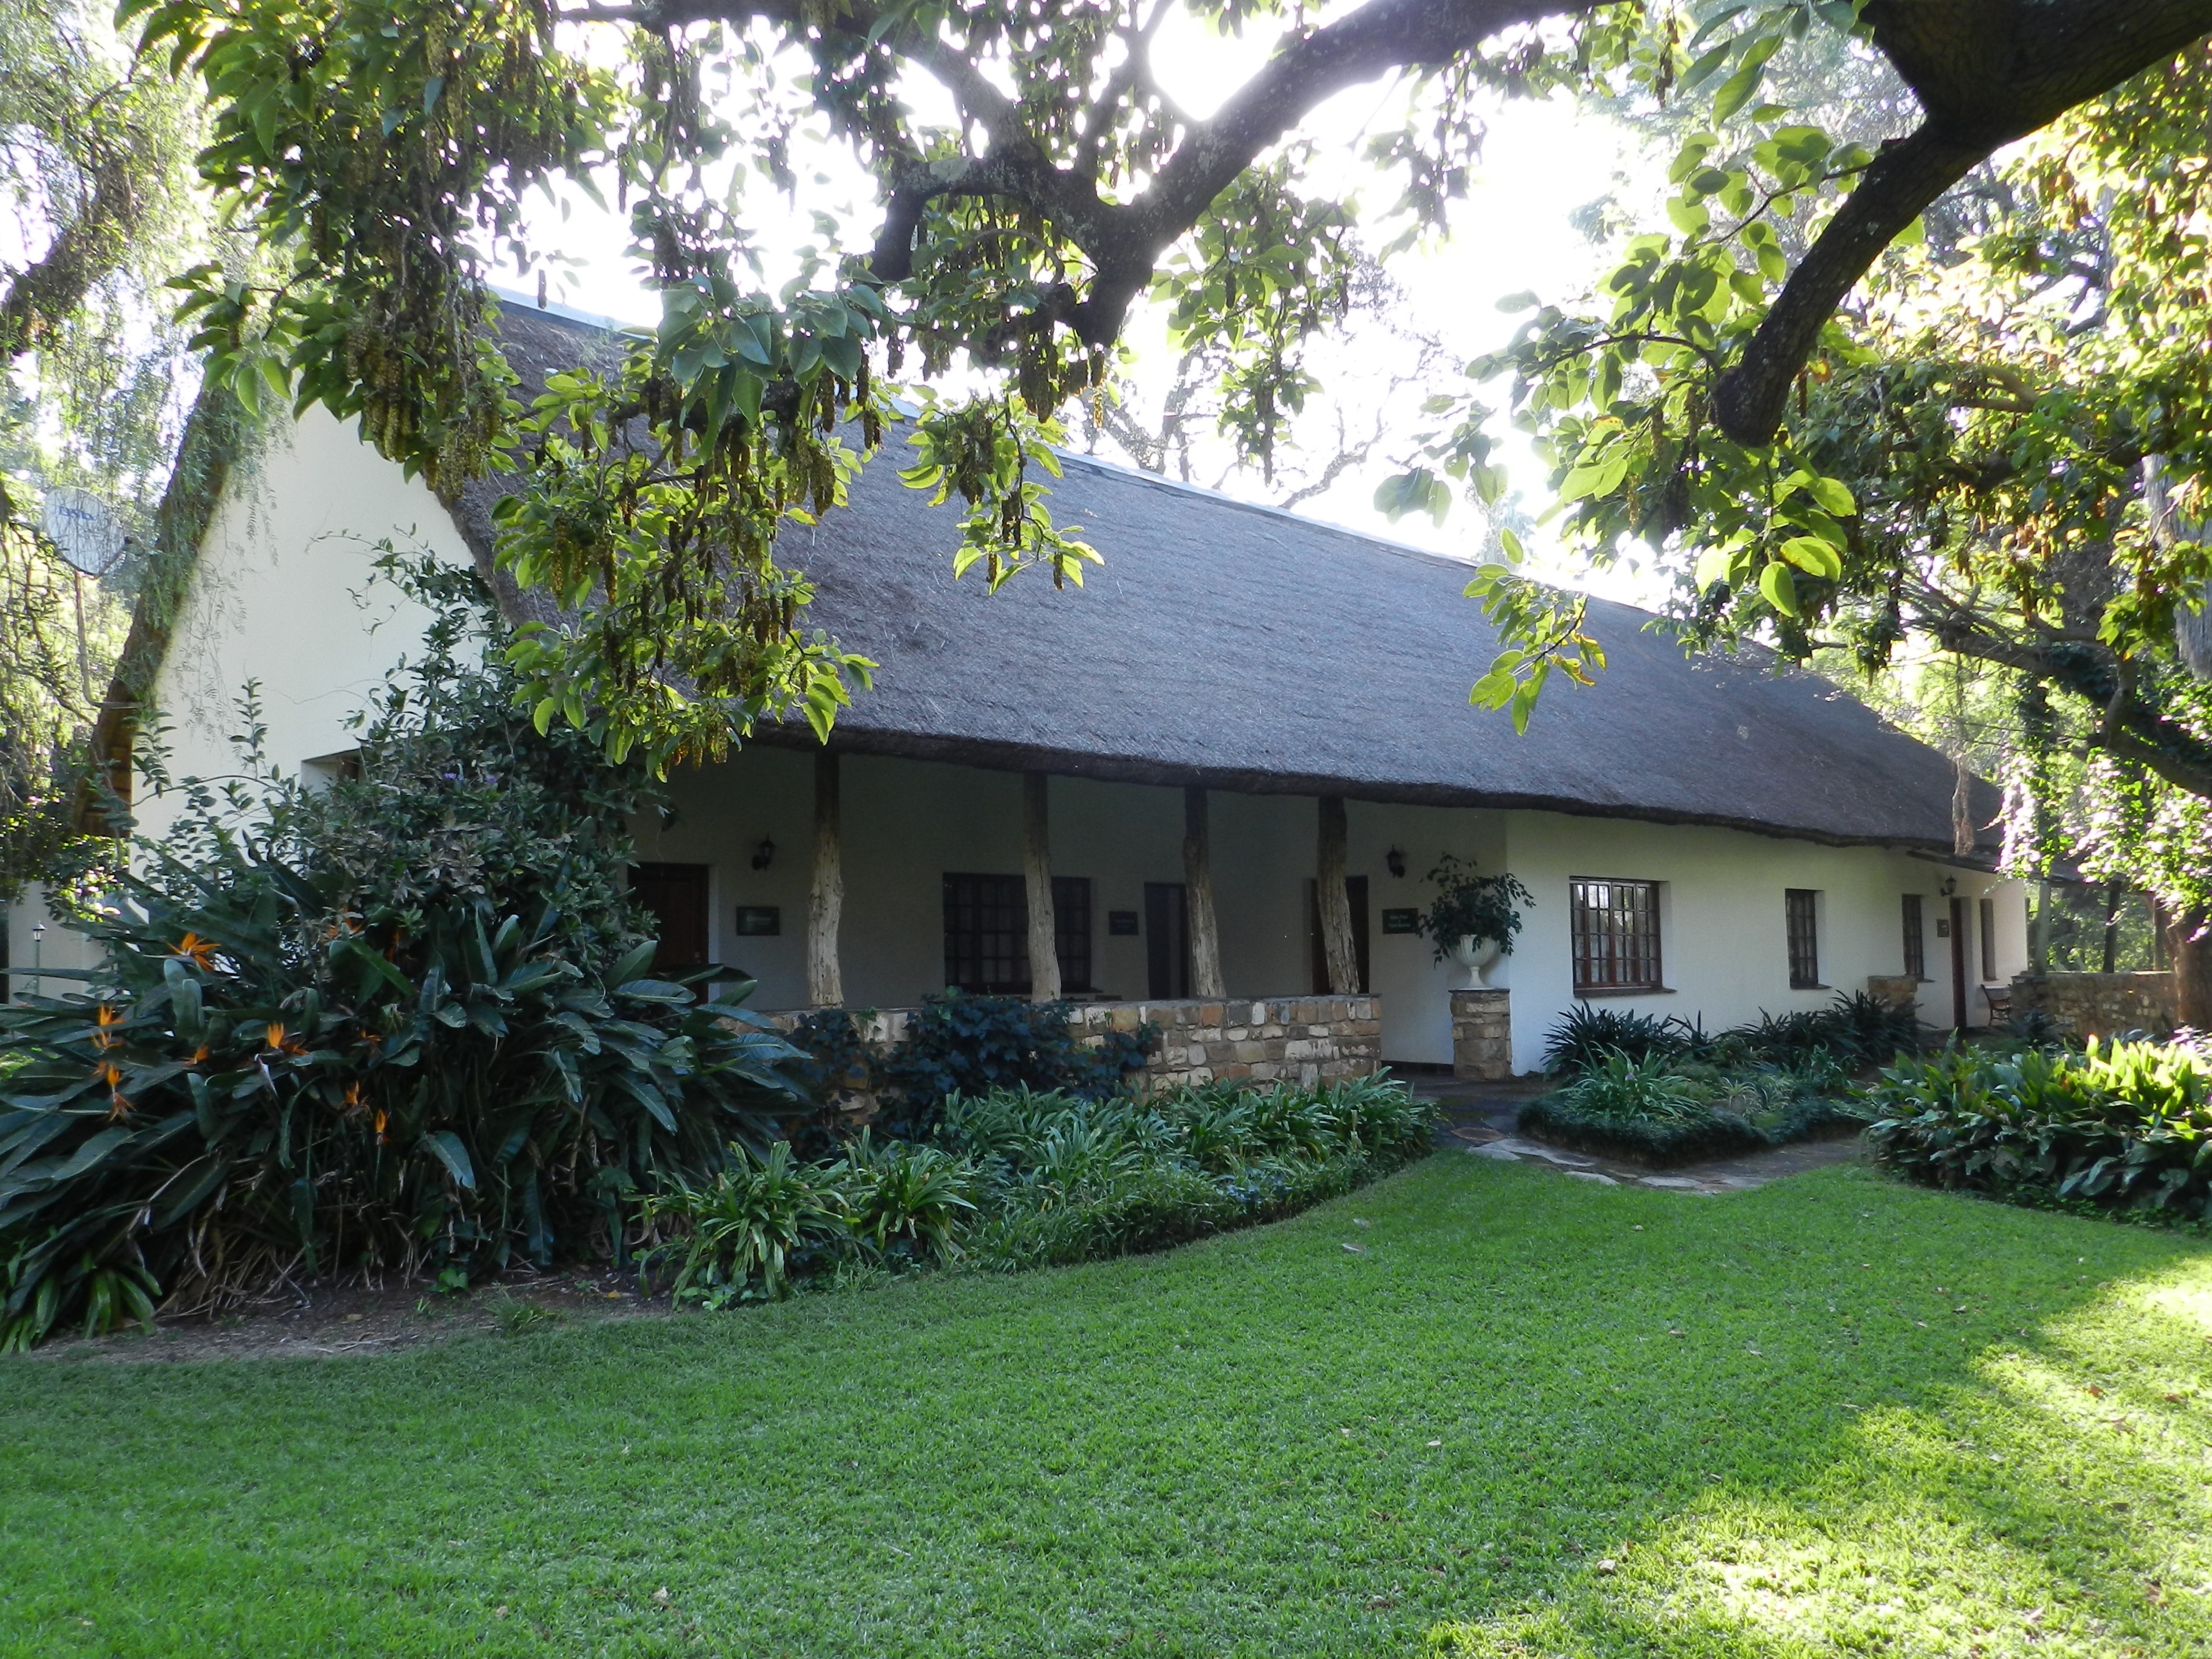 Waterkloof Farm Homestead in 2023, owned by Human and Pam Jordaan, at the President Paul Kruger Guest Lodge